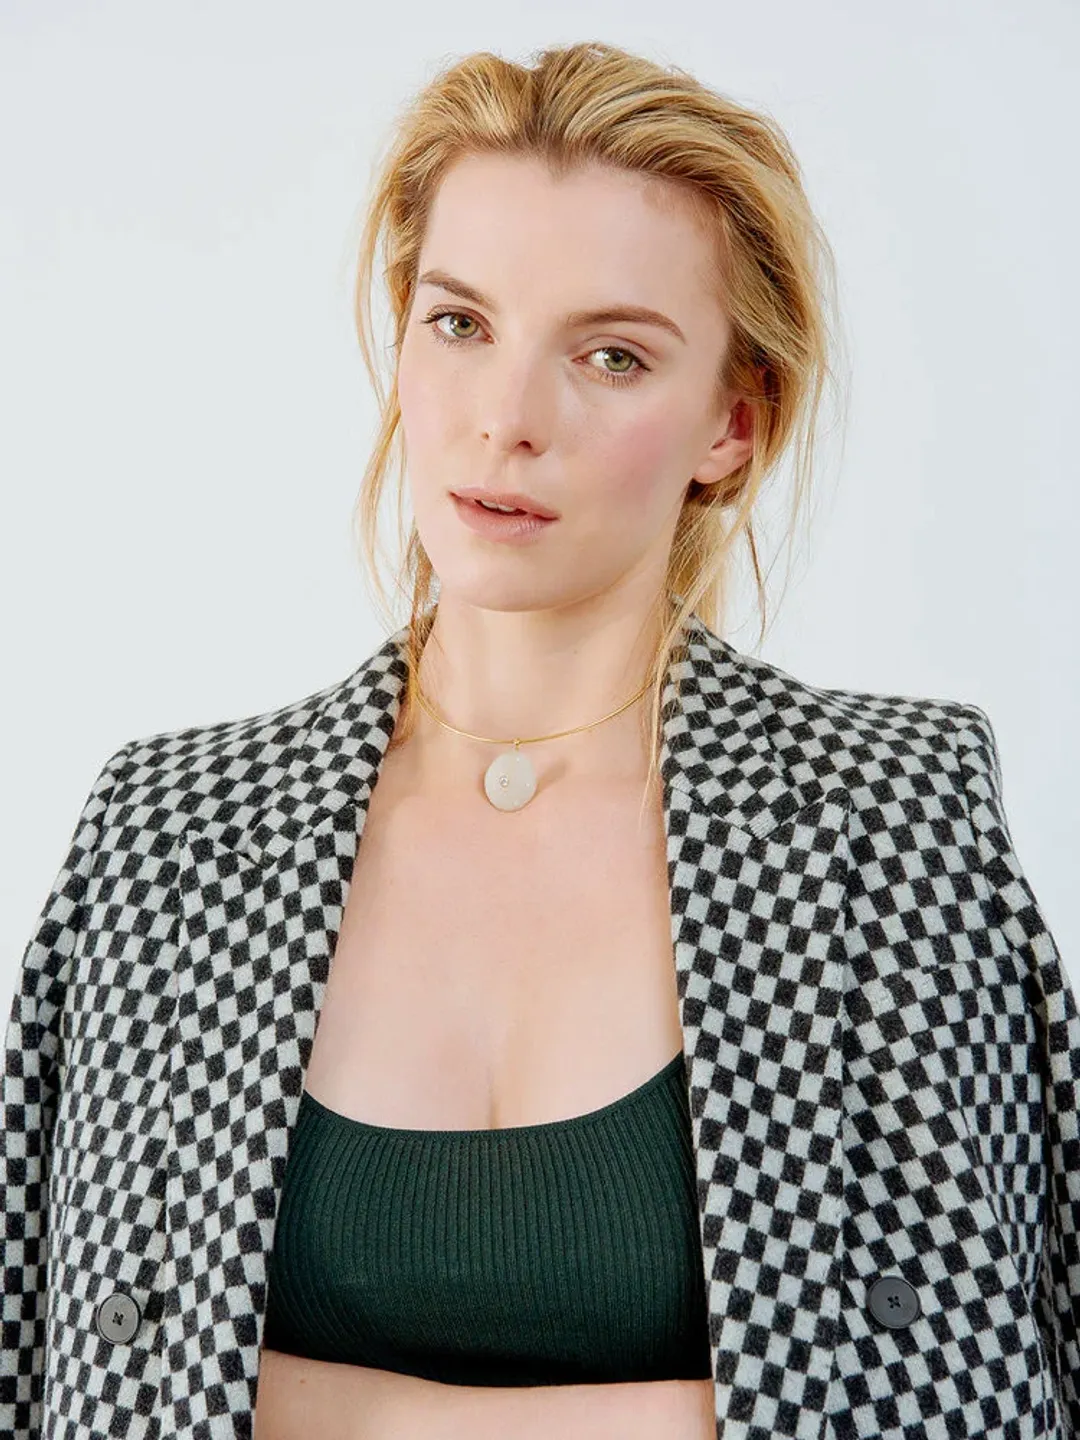 Betty Gilpin early life